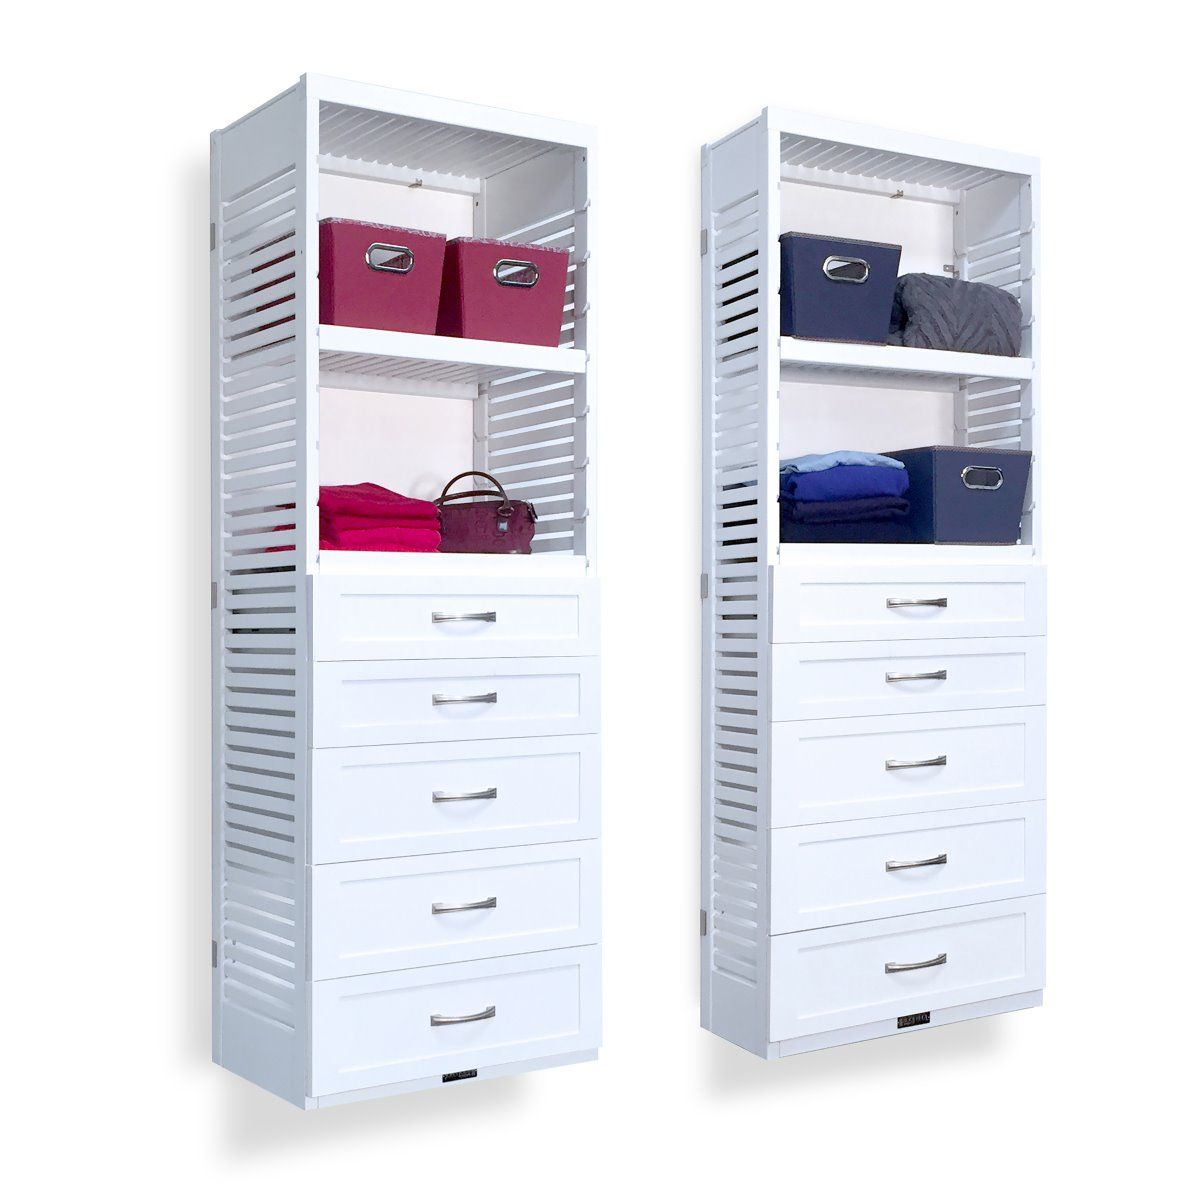 12in. & 16in. Deep Woodcrest White 6ft. Tower with drawers | John Louis Home